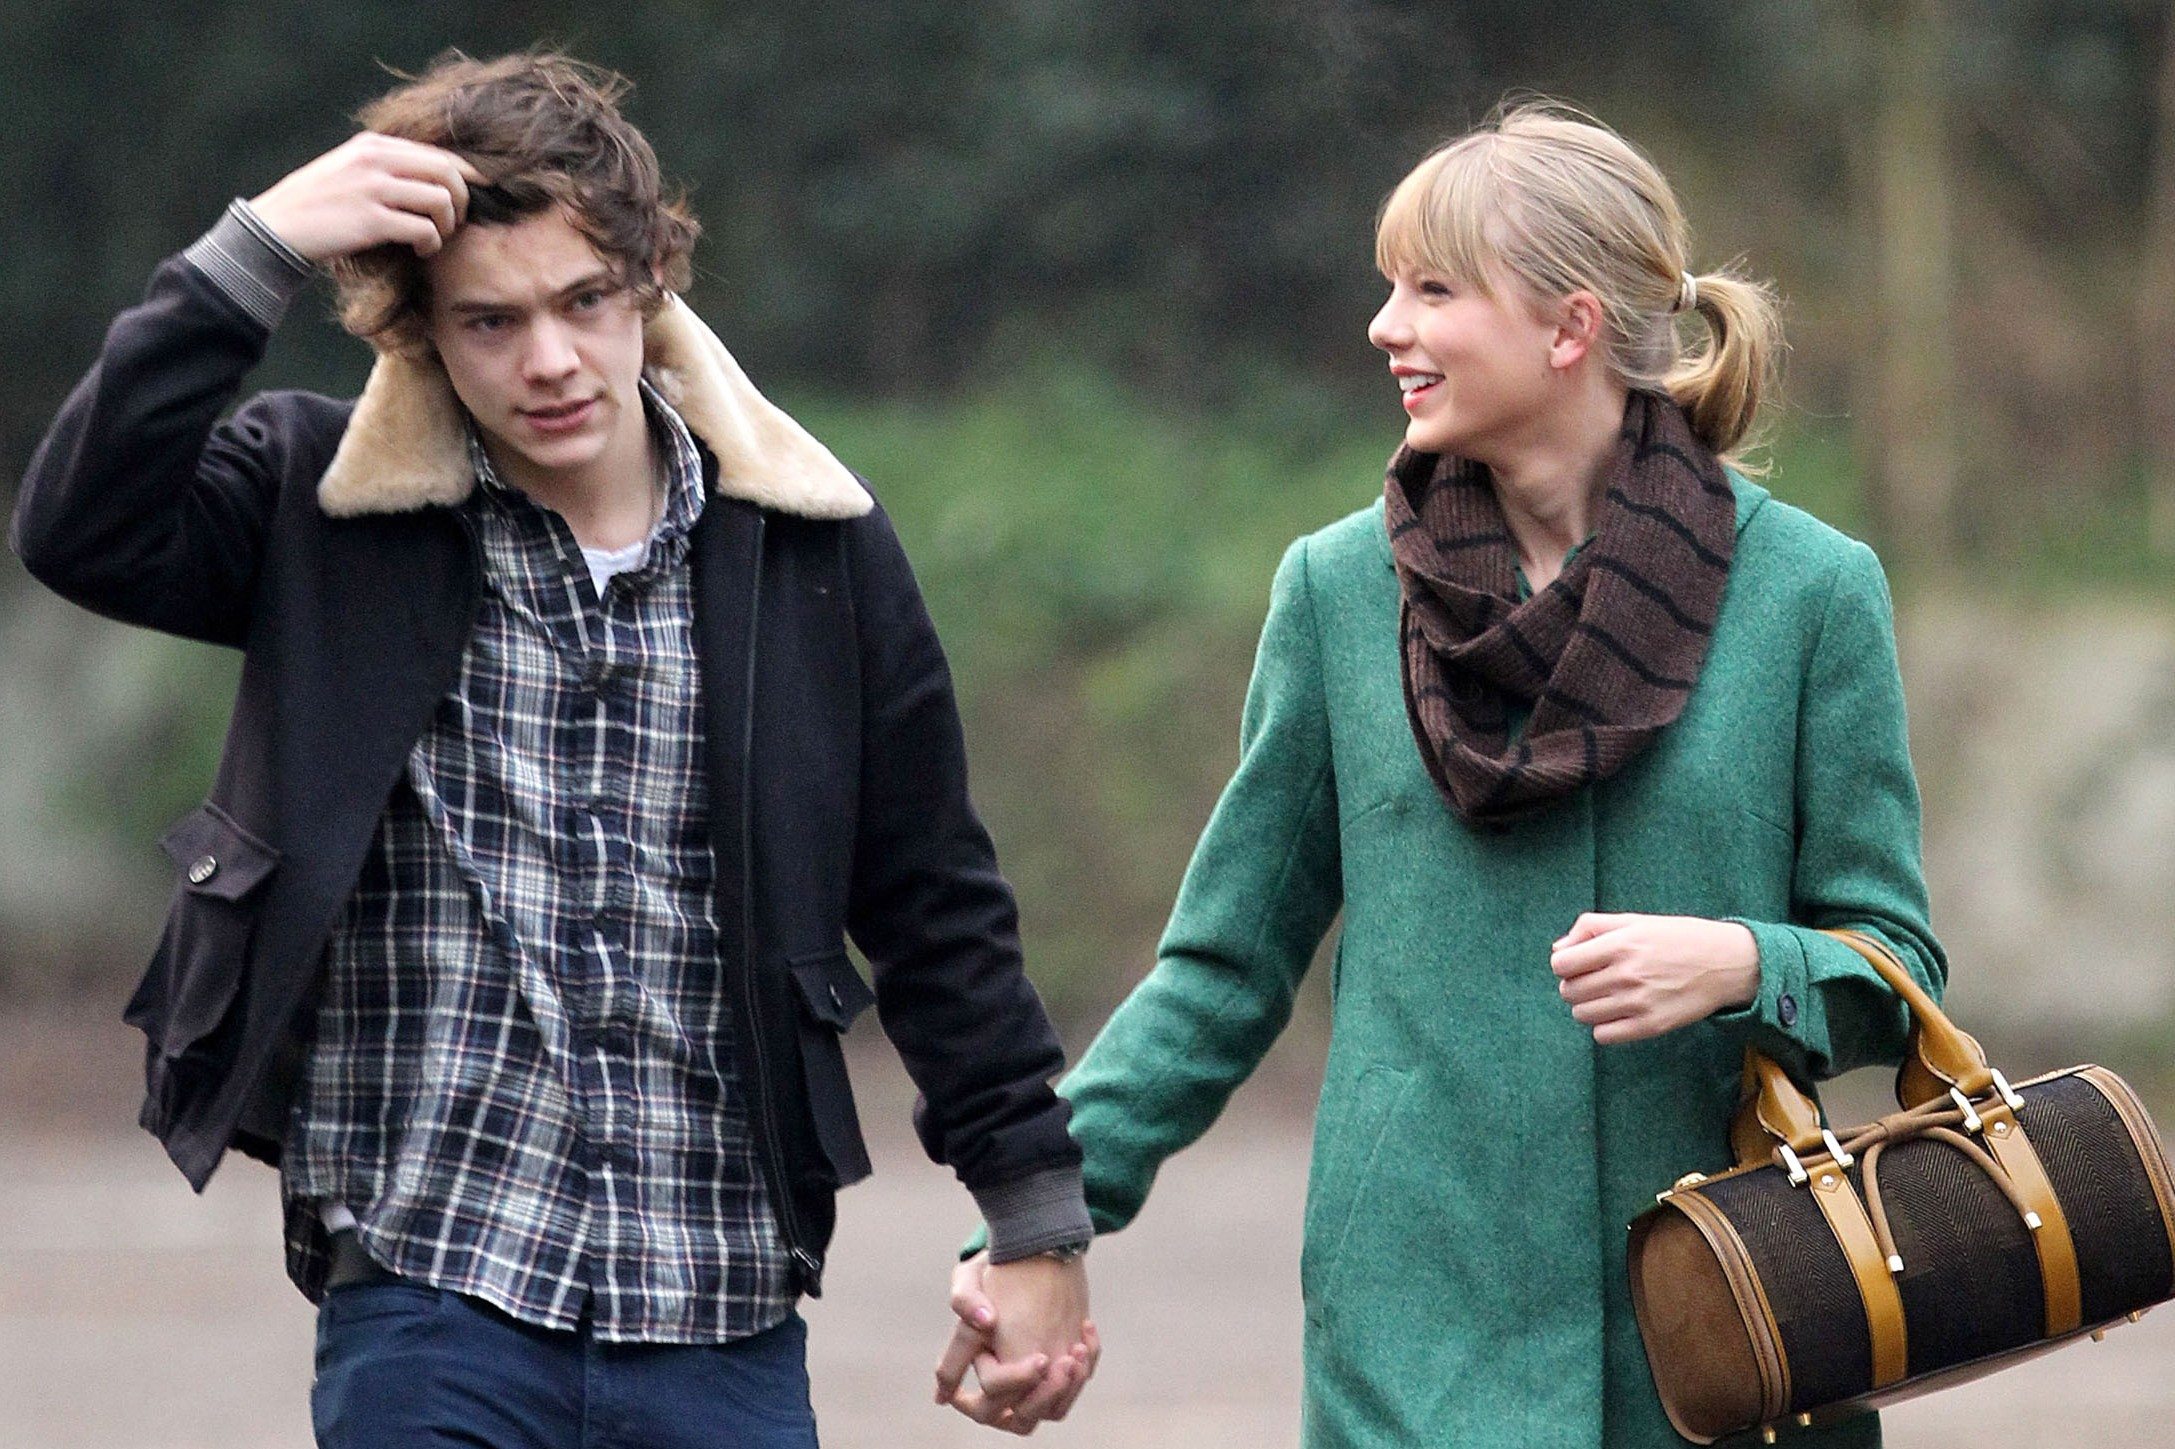 What happened to harry styles and taylor swift relationship?